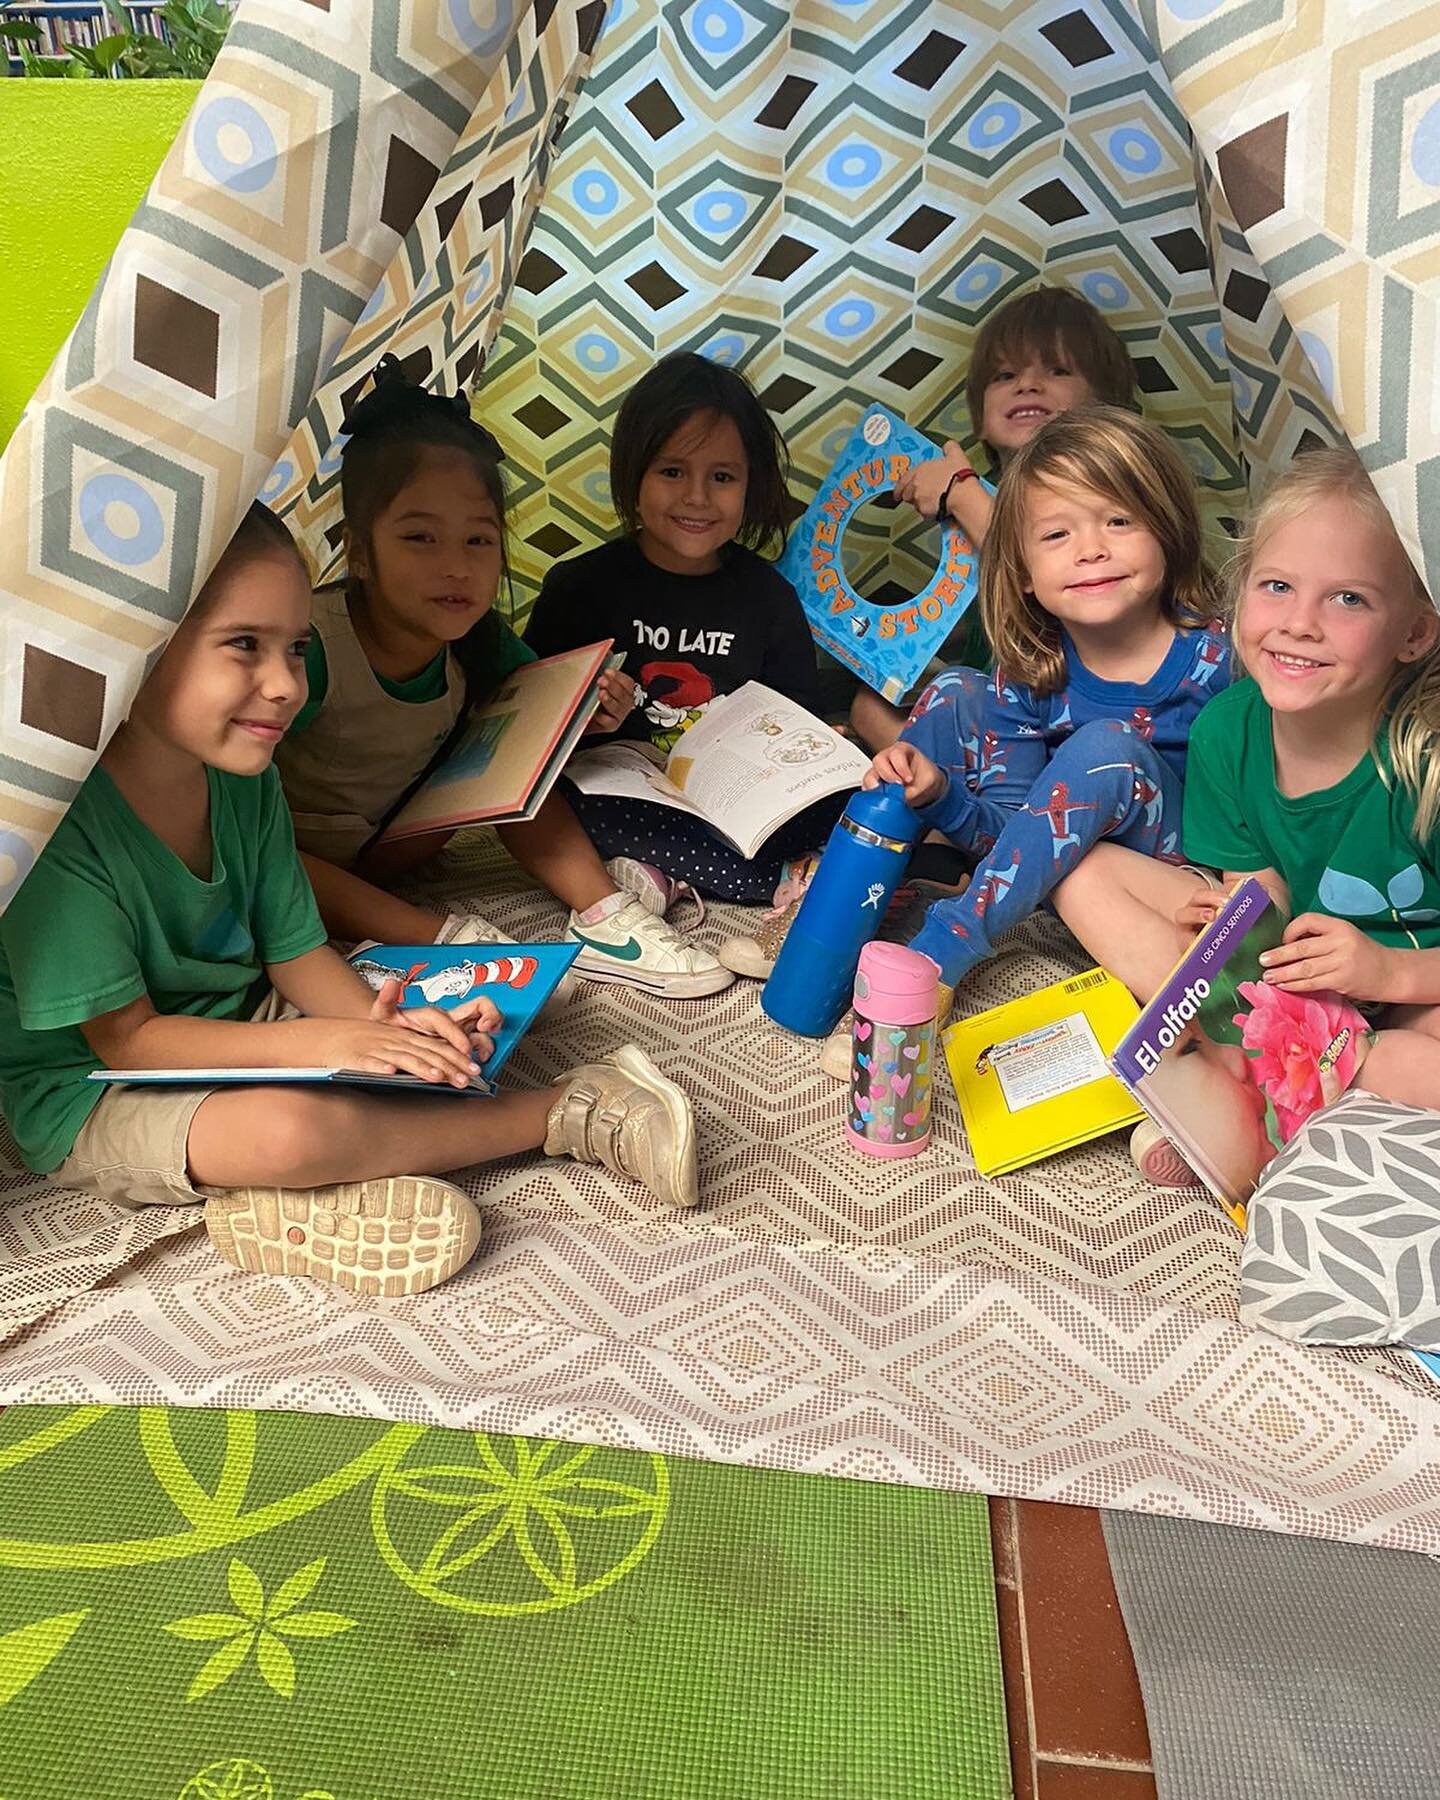 K&iacute;nder 3 had a great time @entreamigos_sanpancho to learning about recycling, making art with recycled materials, and playing in the recycled material playground. 

K&iacute;nder 3 se lo pas&oacute; genial @entreamigos_sanpancho aprendiendo so